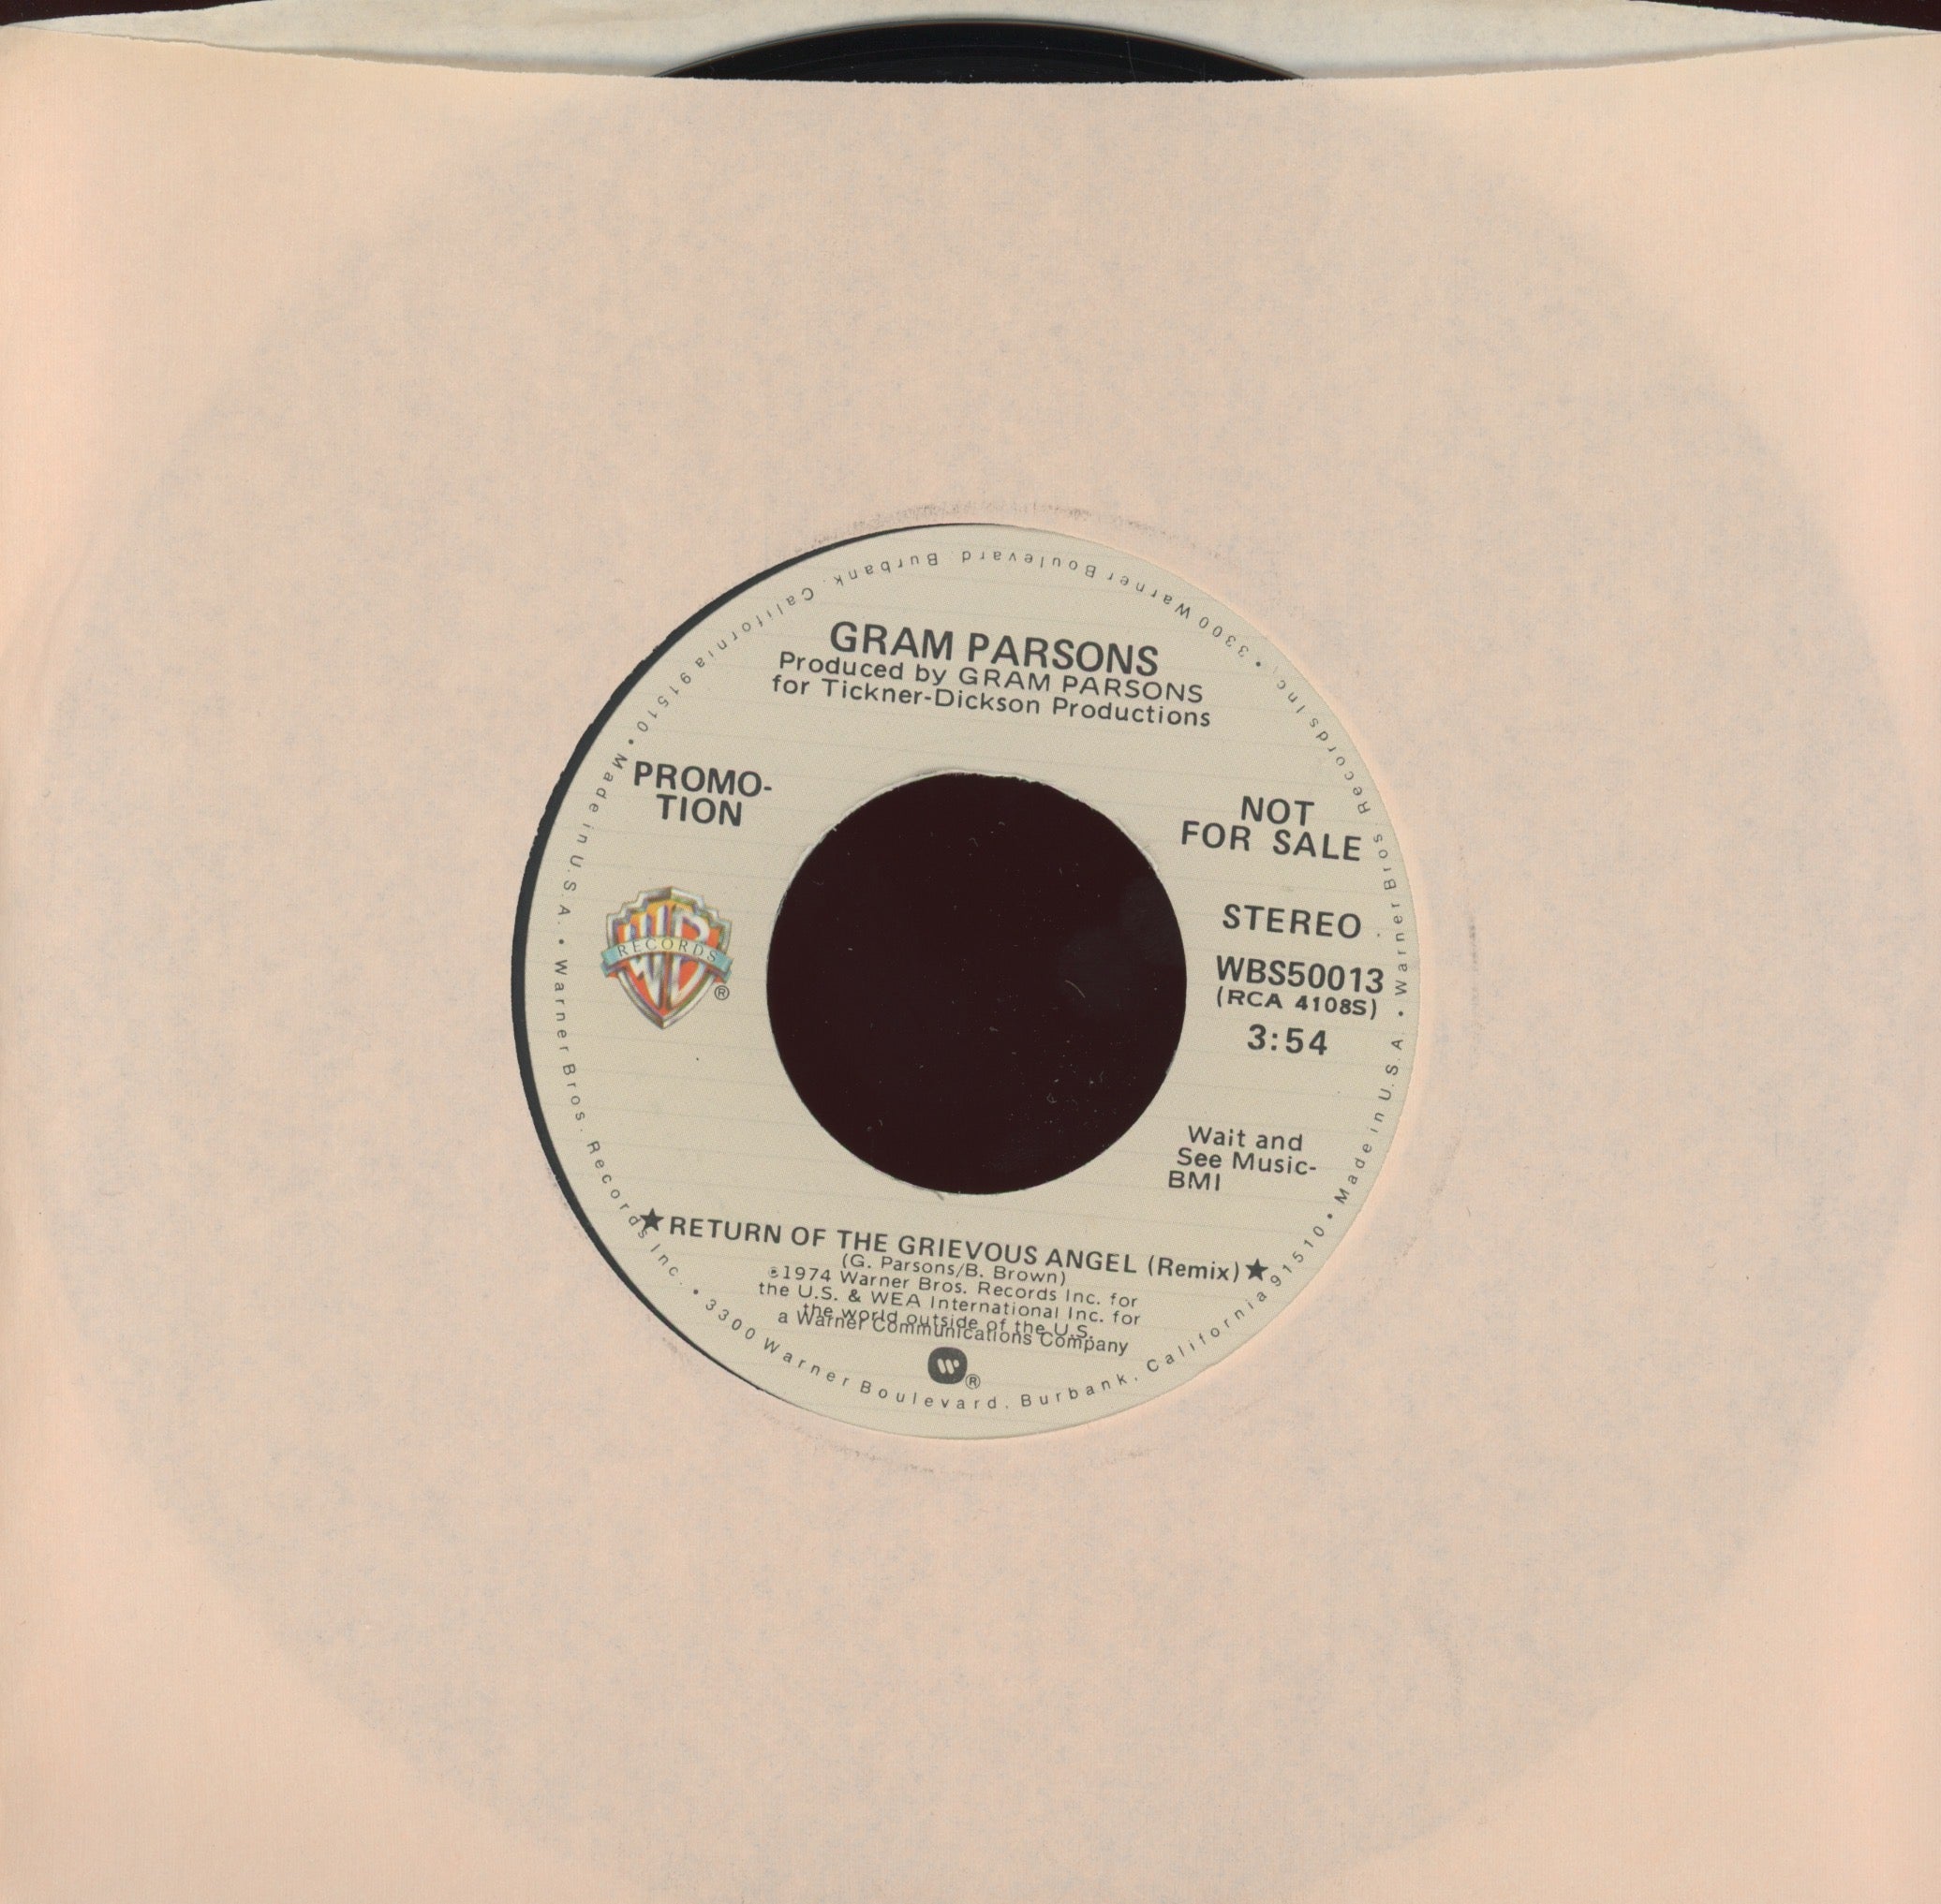 Gram Parsons - Return Of The Grievous Angel on WB Promo Country Rock 45